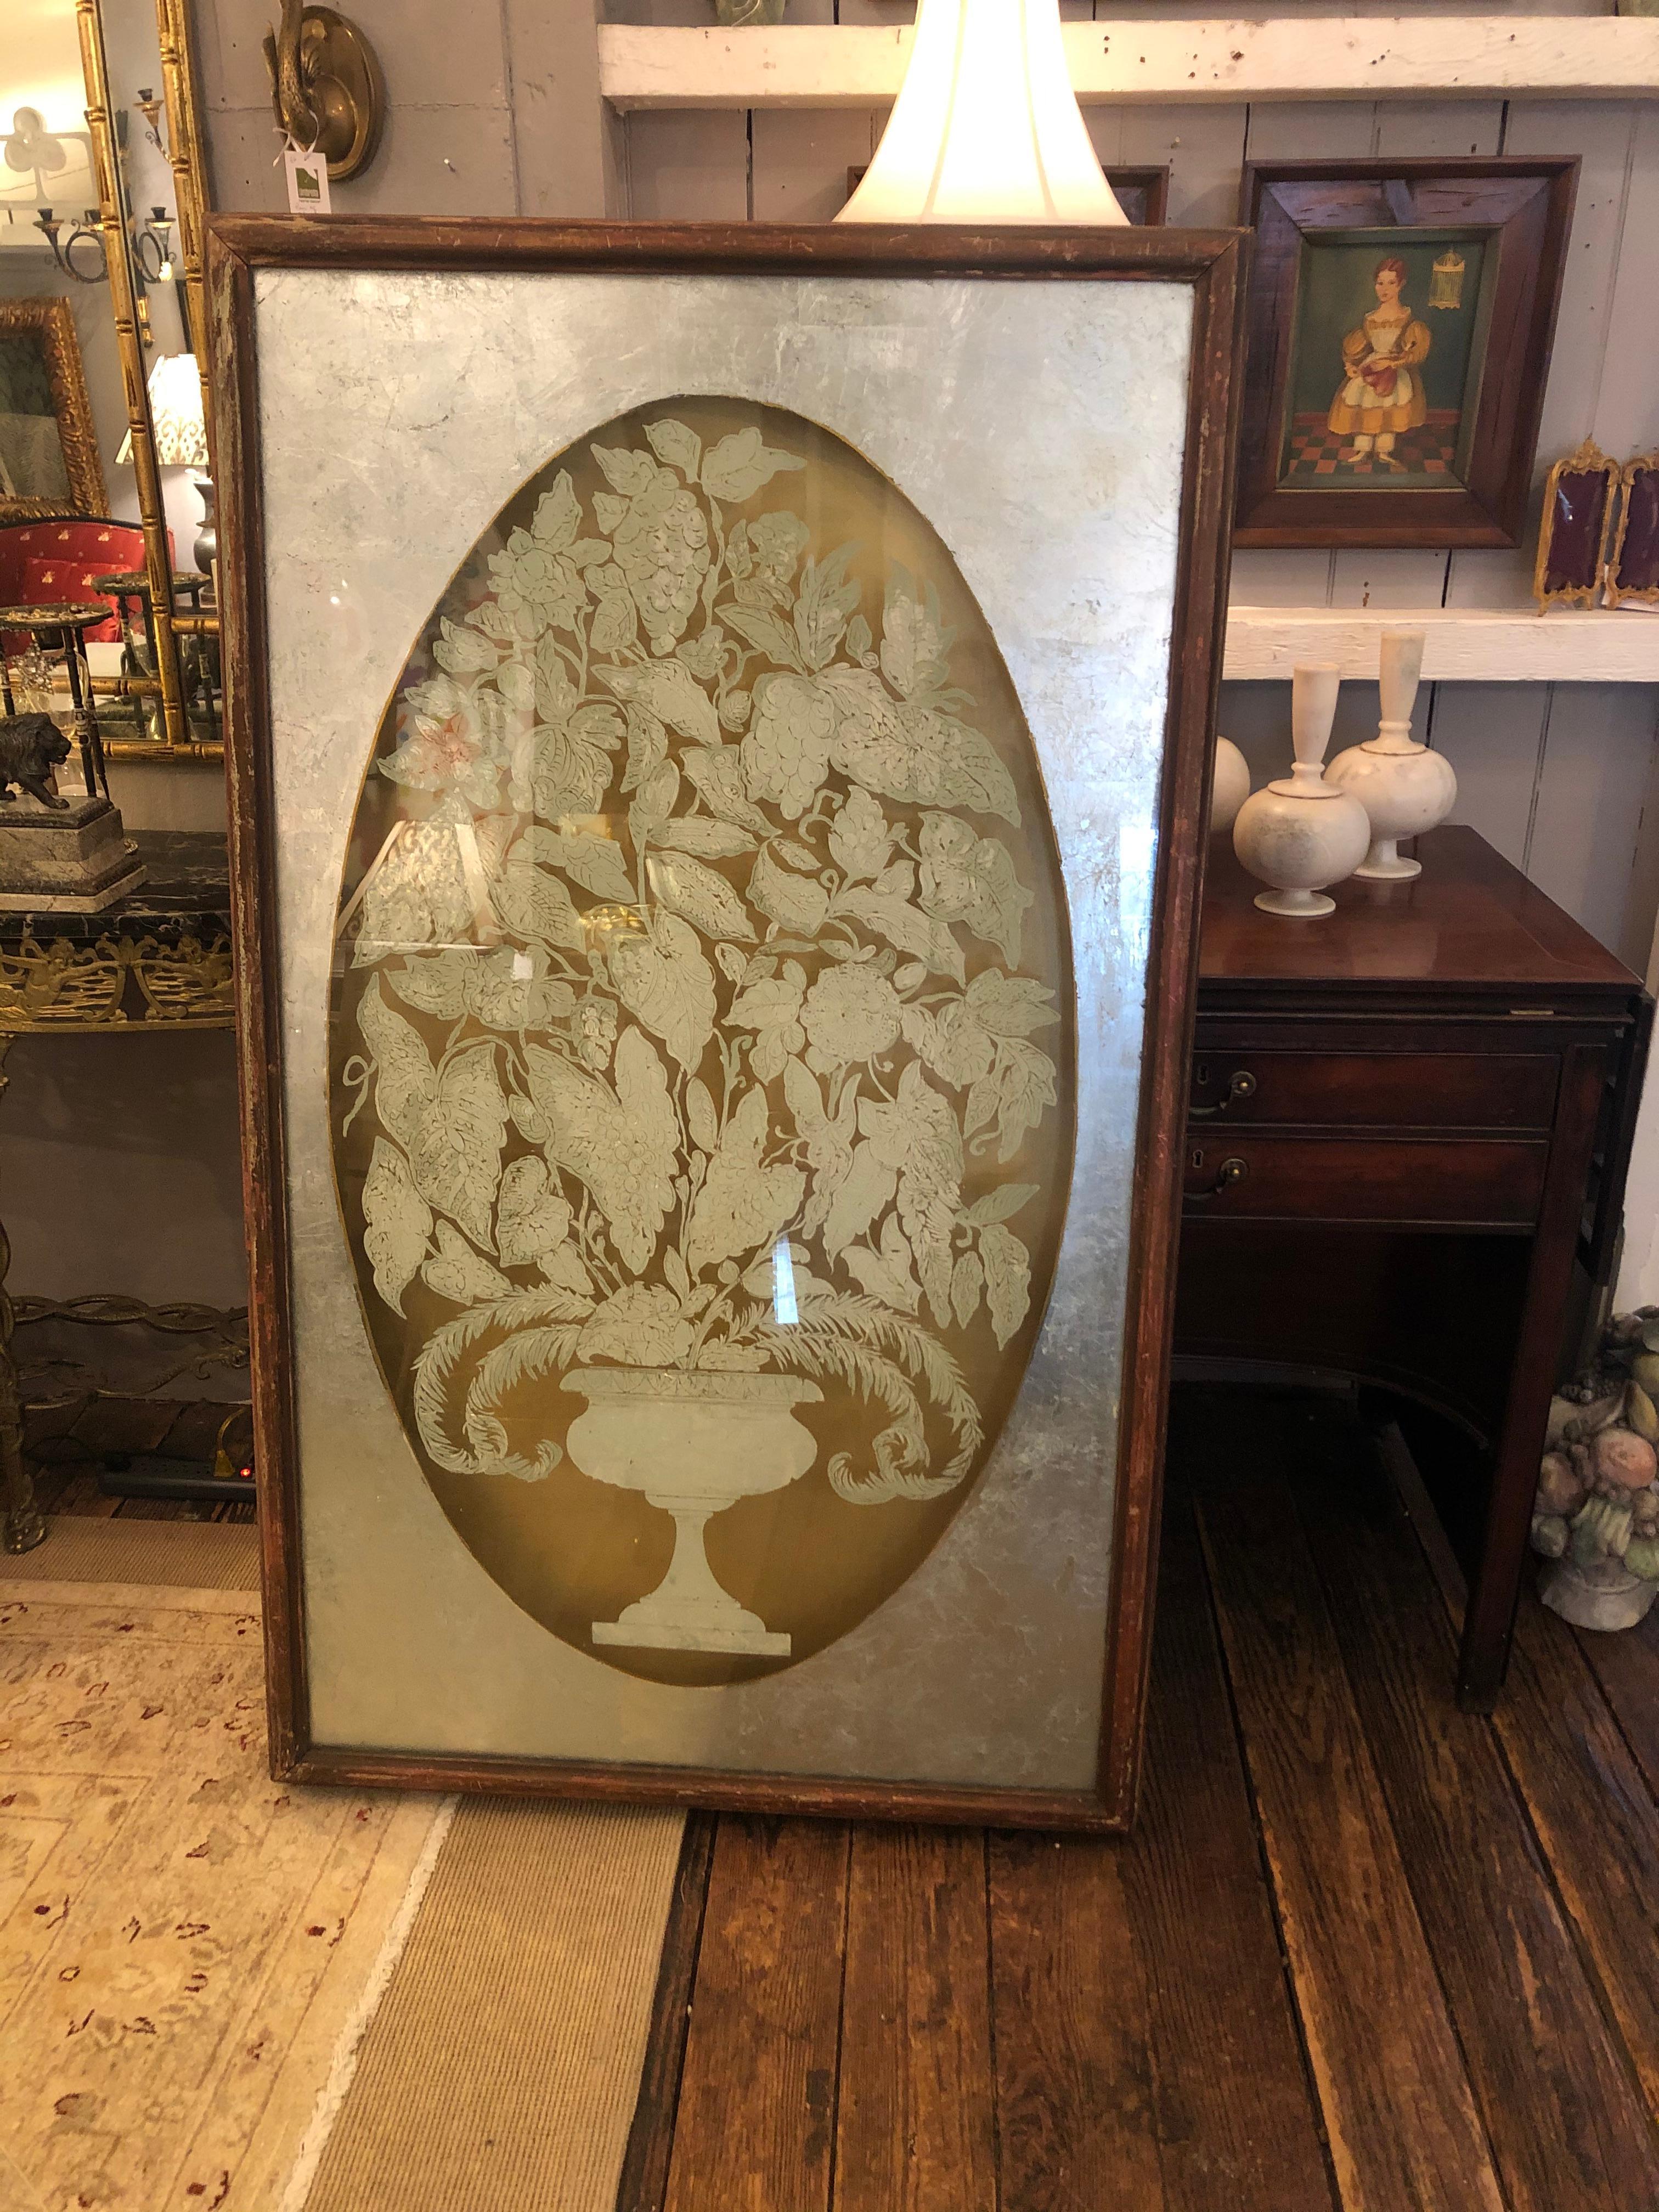 One of a kind amazingly elegant dramatic pair of reverse painting on glass panels in deep 3 dimensional distressed wooden frames. Gold leaf backgrounds allow light to glisten behind the frontal paintings of oval silver leaf floral arrangements with